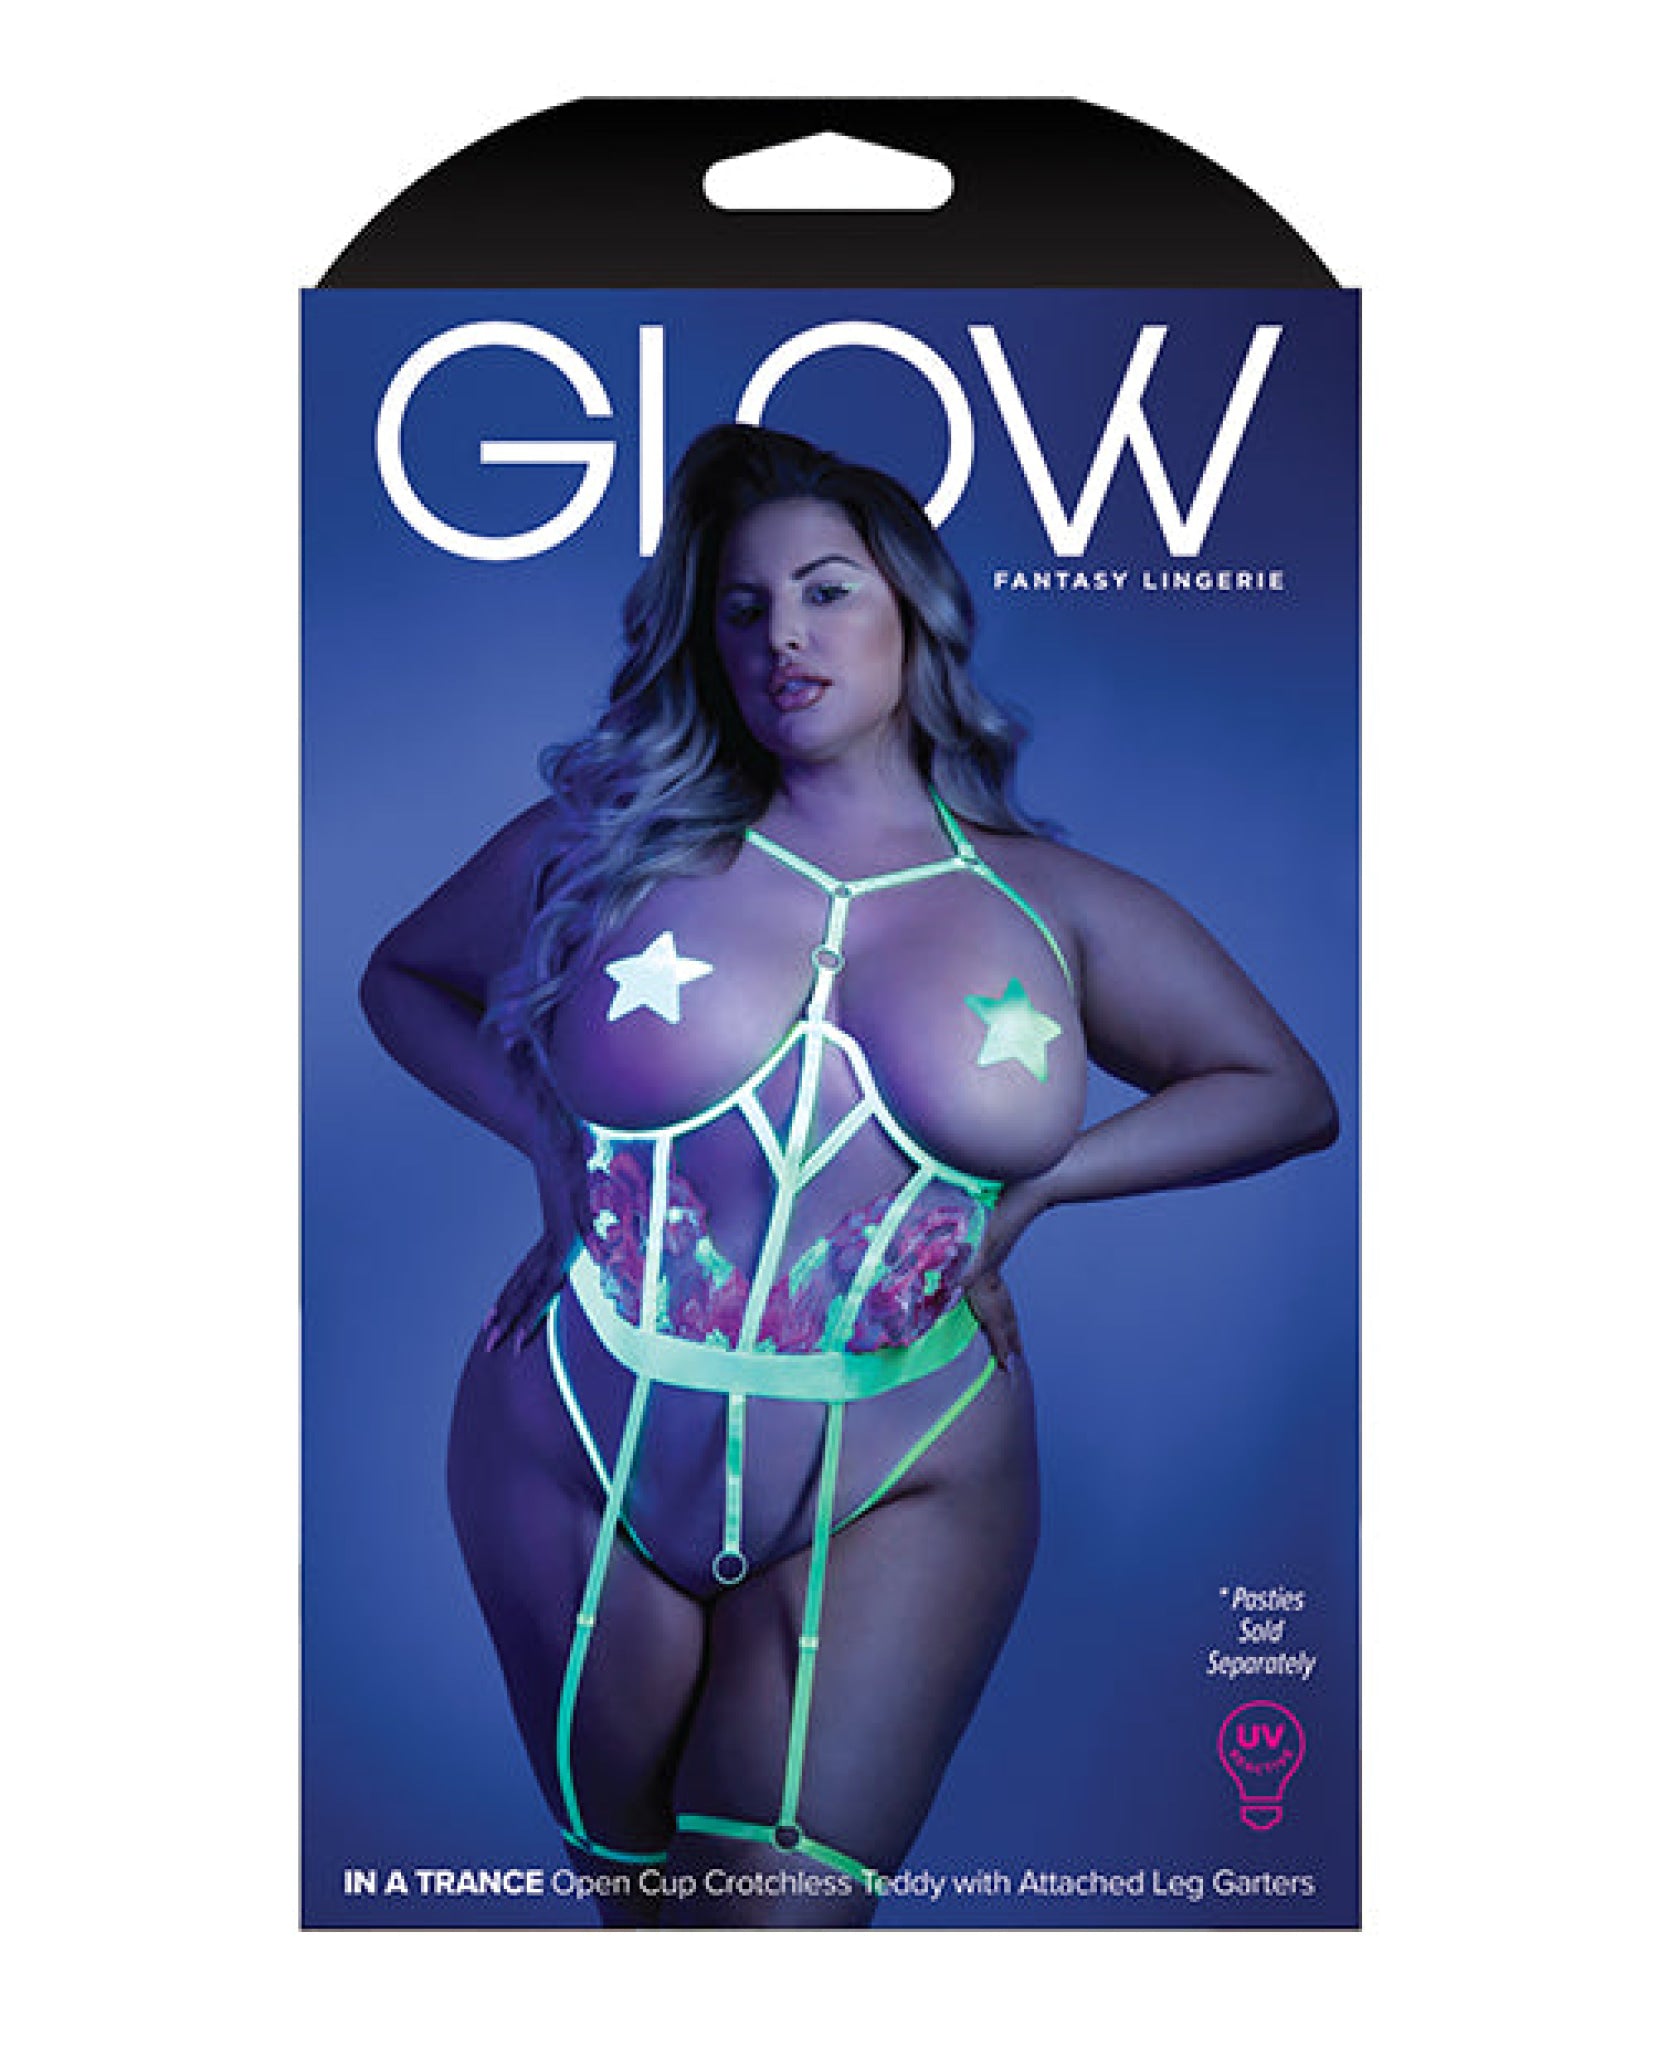 Glow Black Light Embroidered Cupless Garter Teddy (pasties Not Included) Neon Chartreuse Qn Fantasy Lingerie